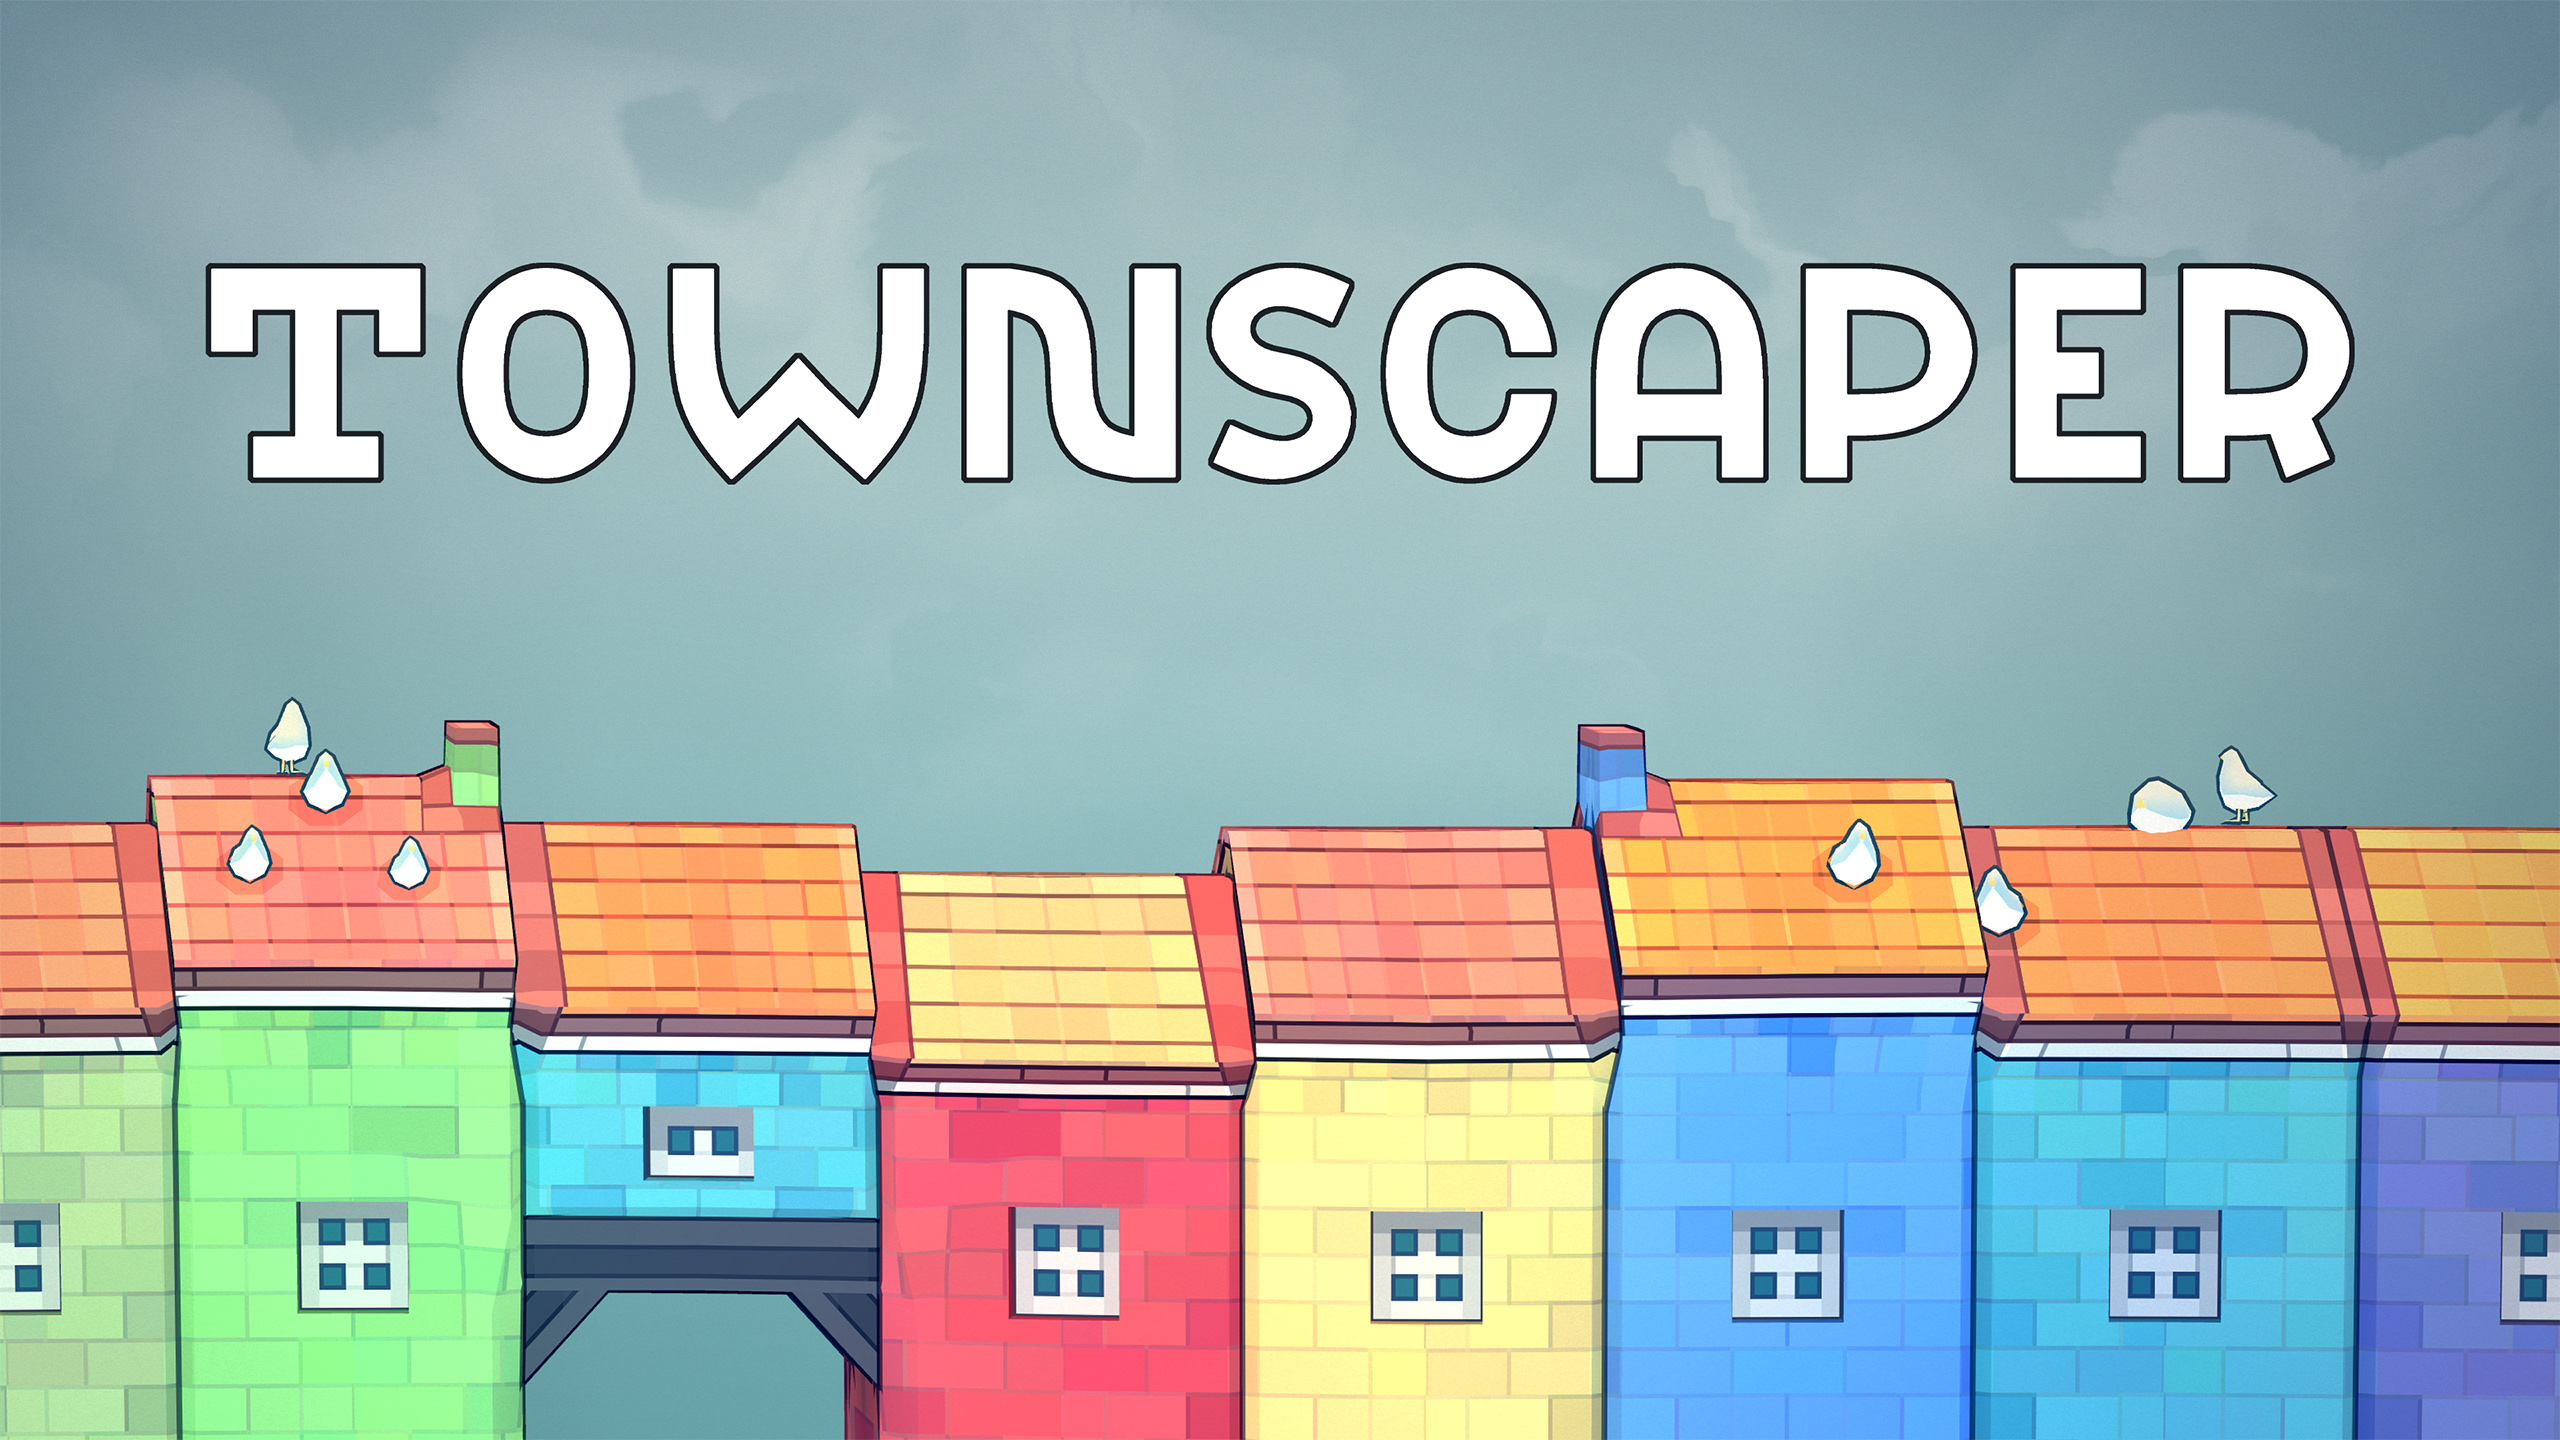 Townscaper Wallpapers